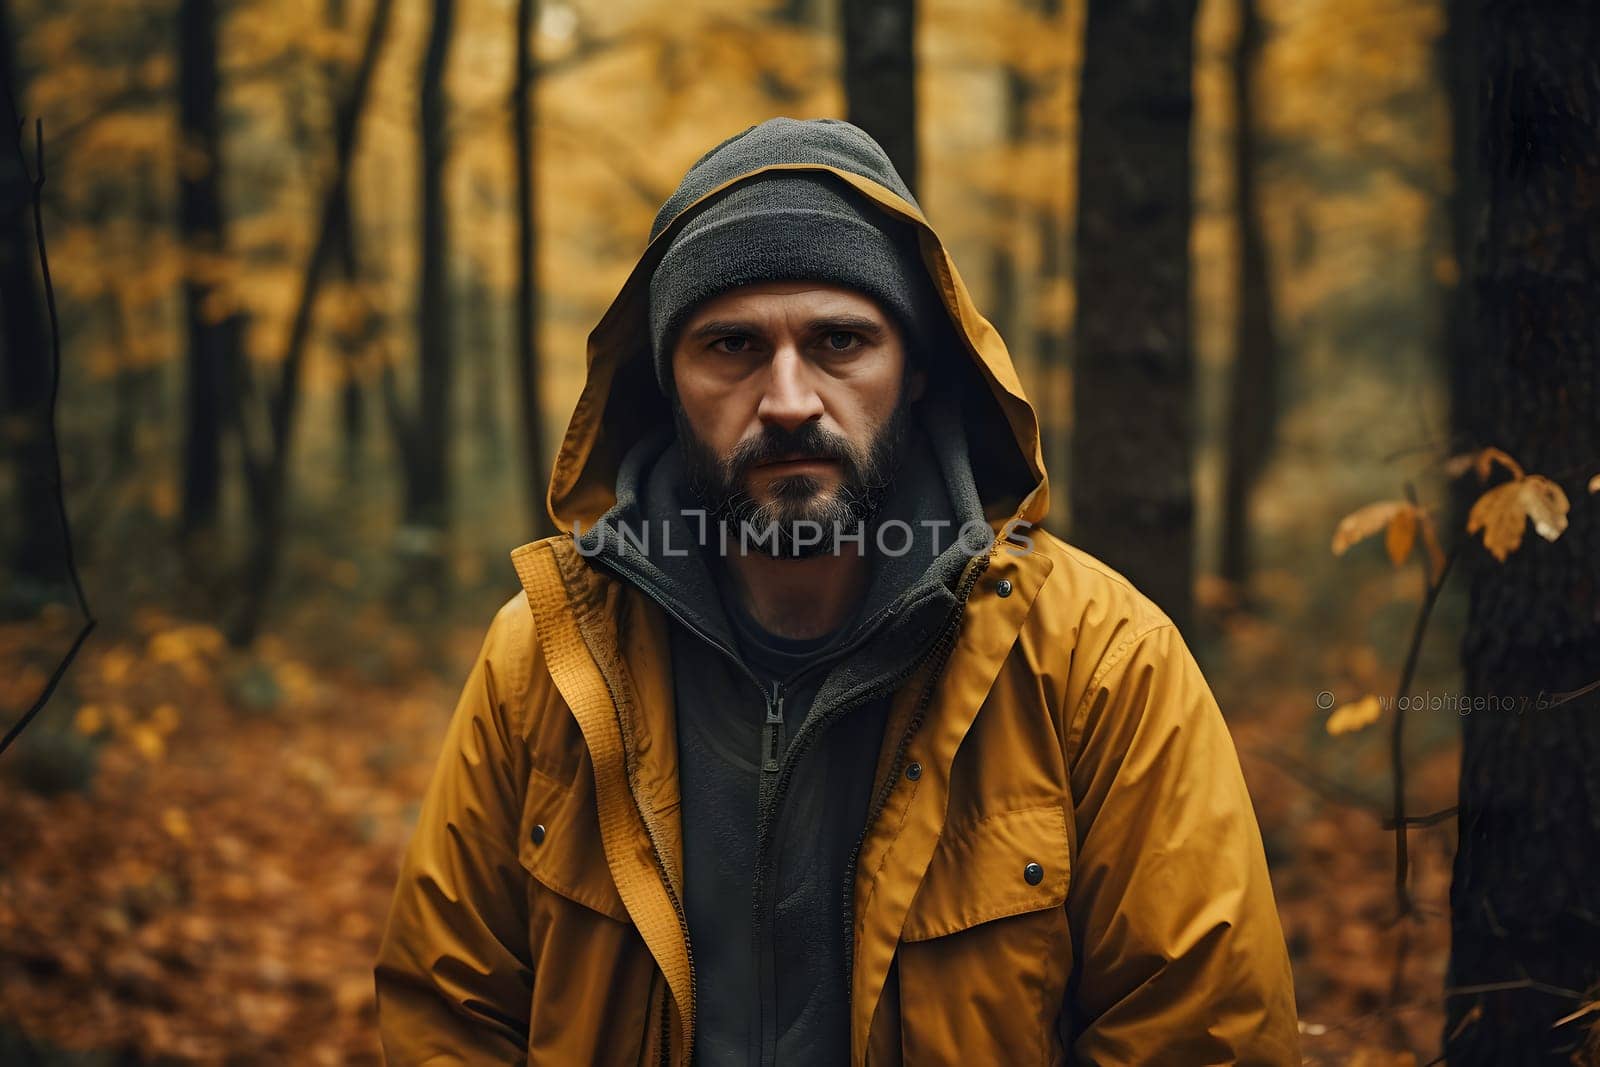 Caucasian man in forest at autumn day. Neural network generated image. Not based on any actual person or scene.